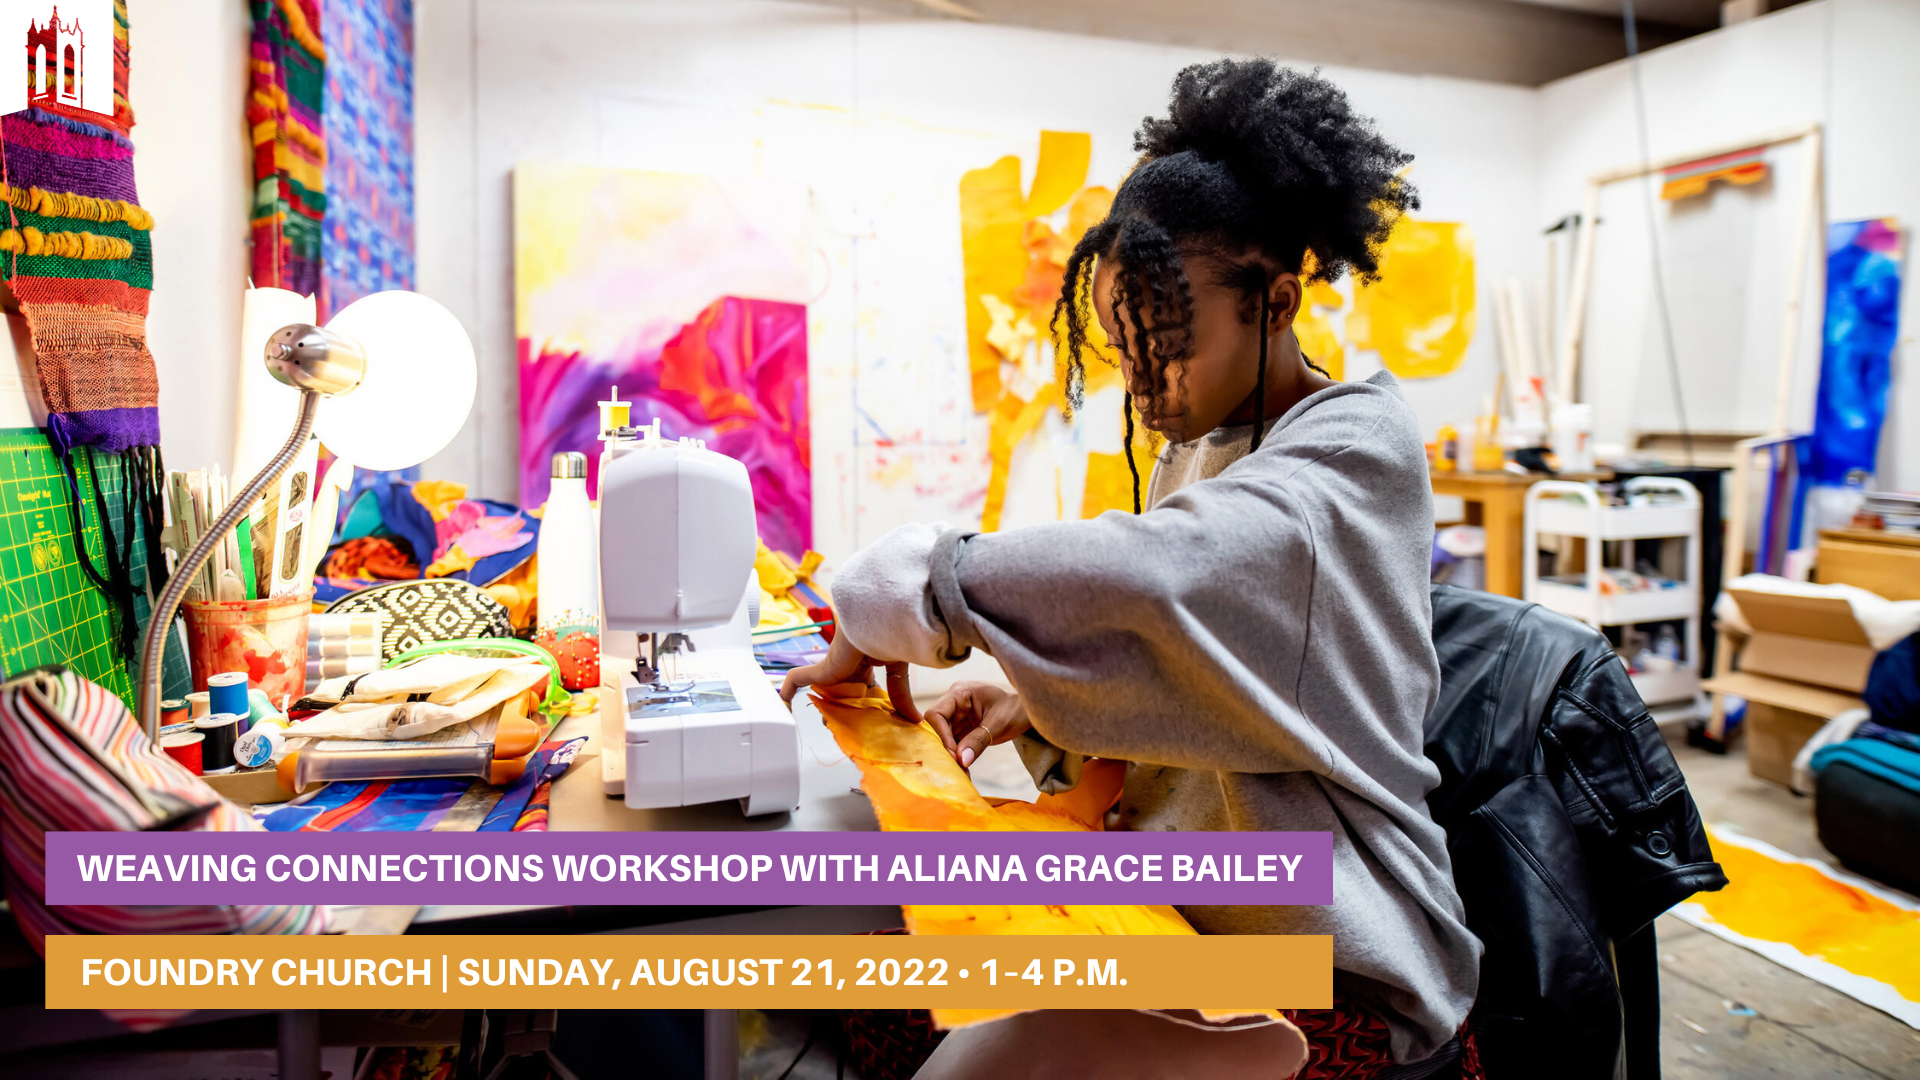 Weaving Connections Workshop with Aliana Grace Bailey